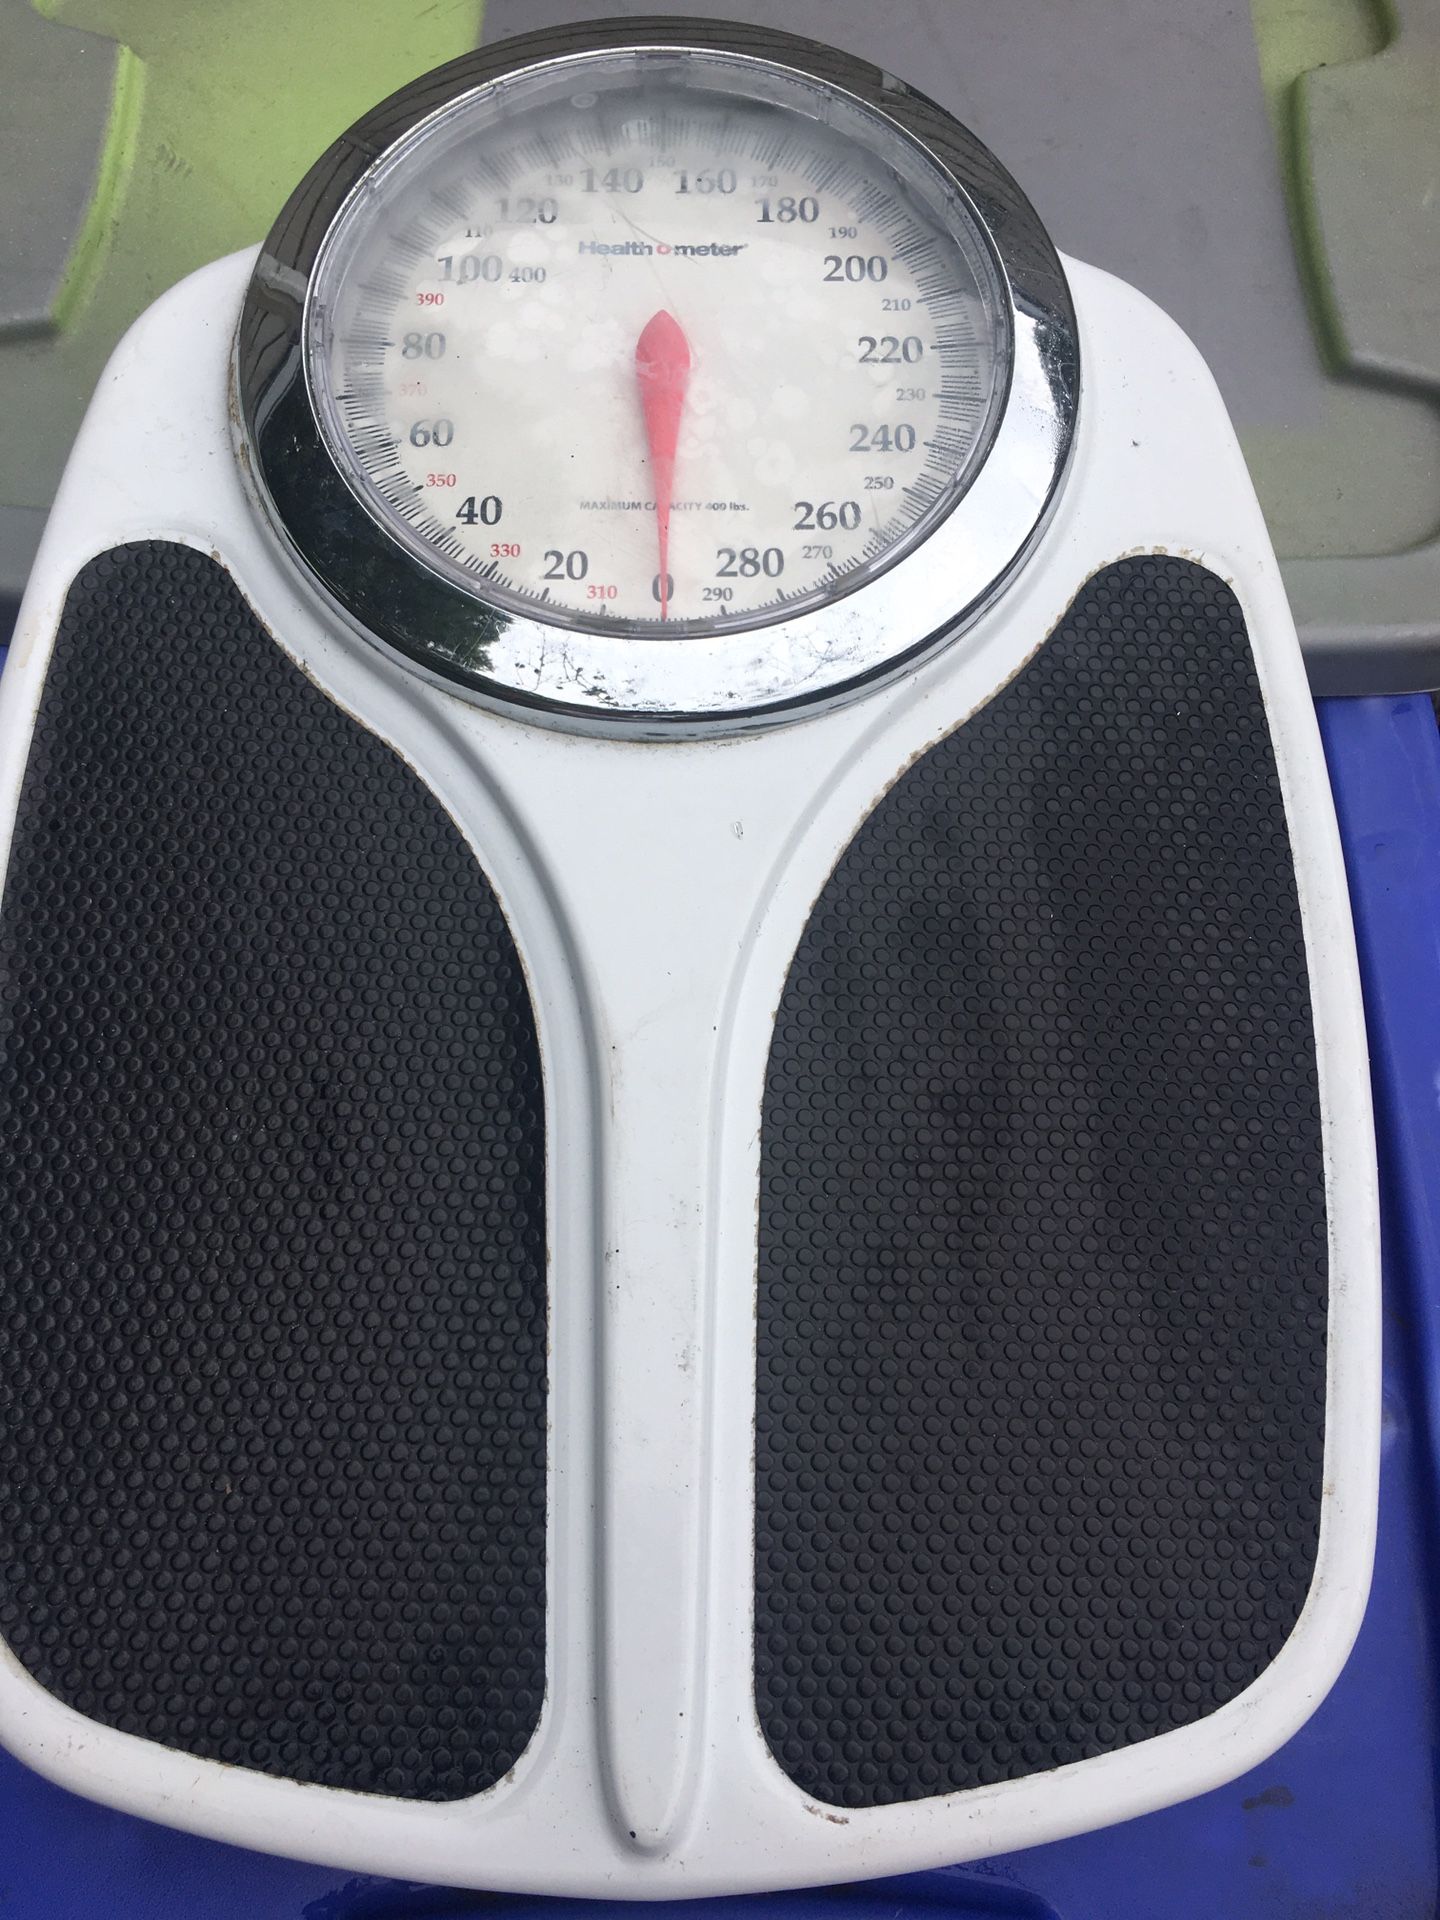 Nice scale goes up to 400 pounds only $20 firm